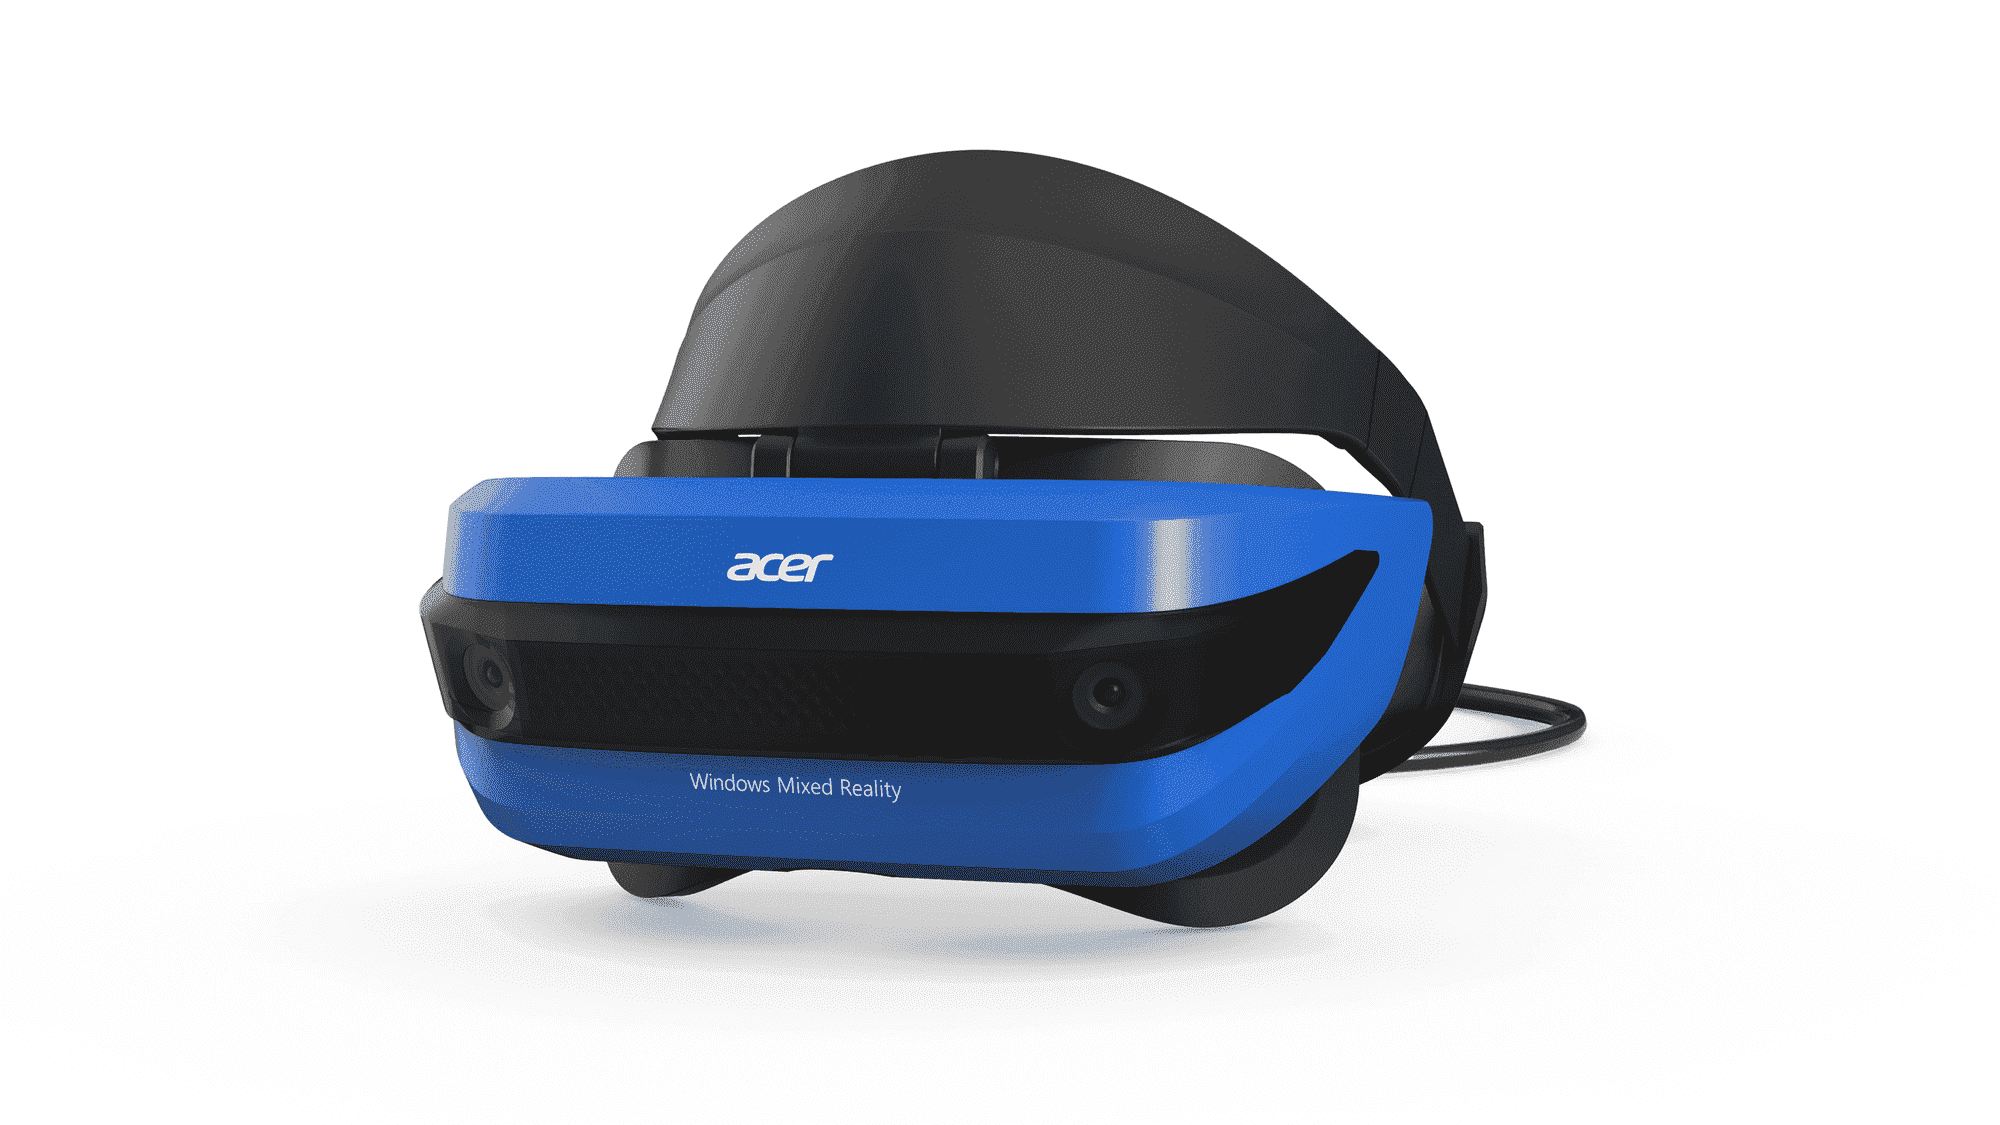 Samsung HMD Odyssey+ is a new Windows Mixed Reality headset cd13009711673e0292f486ebeeecf4ca.png